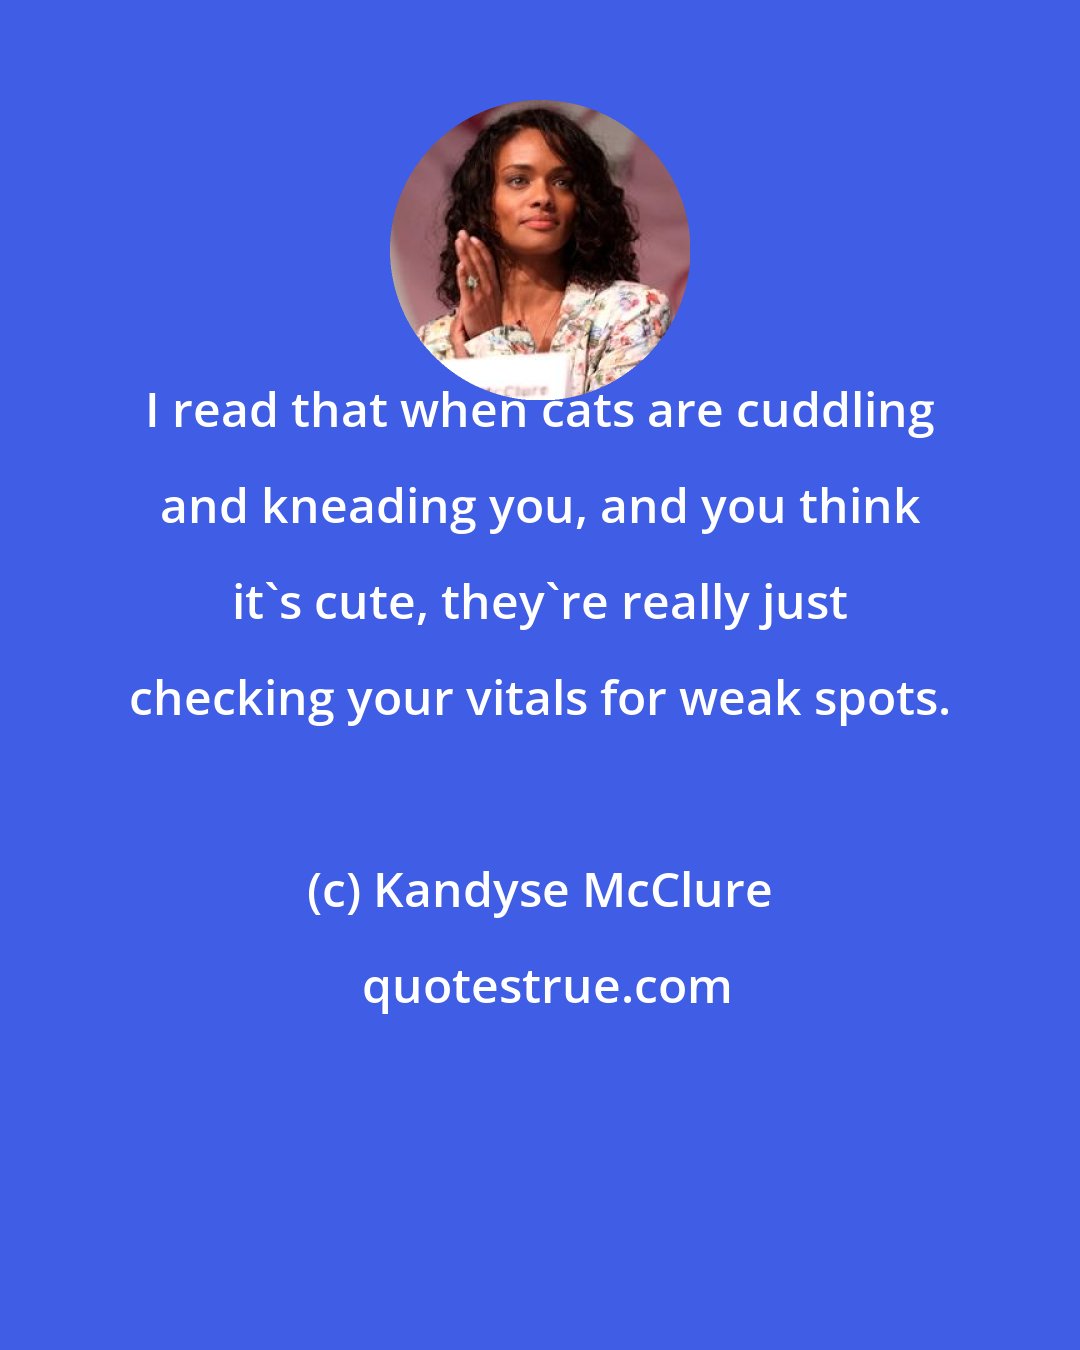 Kandyse McClure: I read that when cats are cuddling and kneading you, and you think it's cute, they're really just checking your vitals for weak spots.